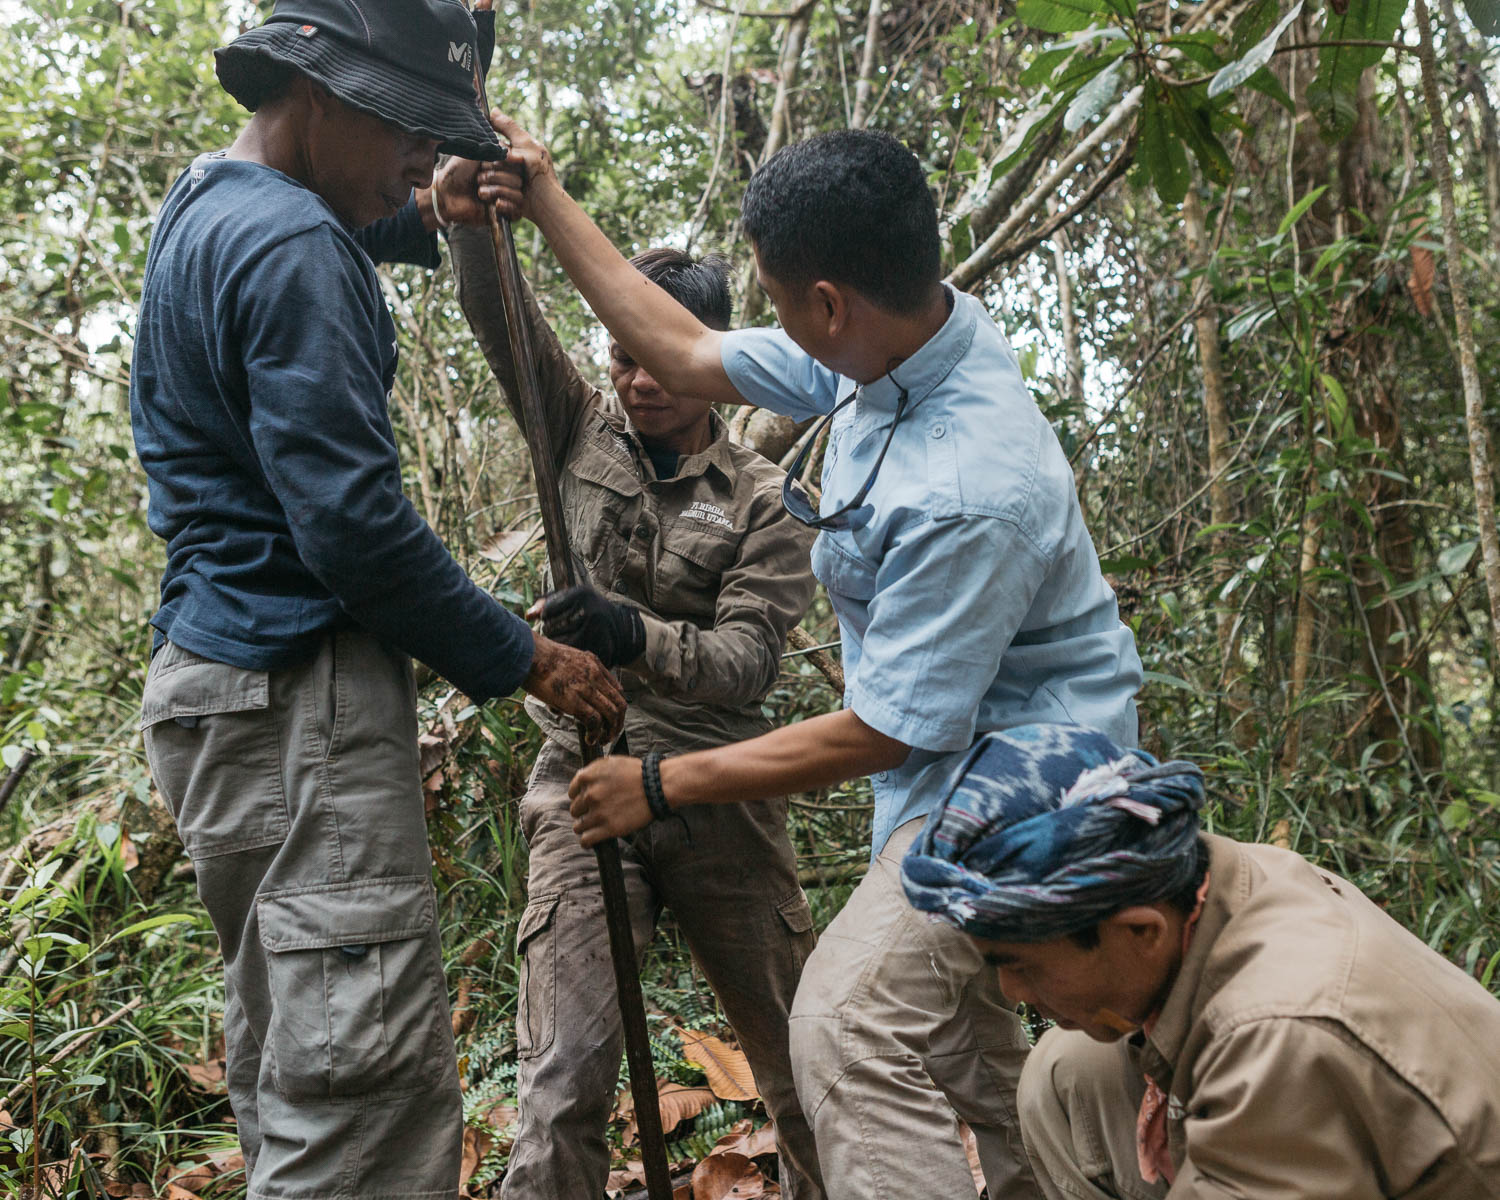  Staffs from PT Rimba Makmur Utama measure the depth of peat composition in the forest in Hantipan. In this area, more than 3 meters of peat detected before touching the real soil. 